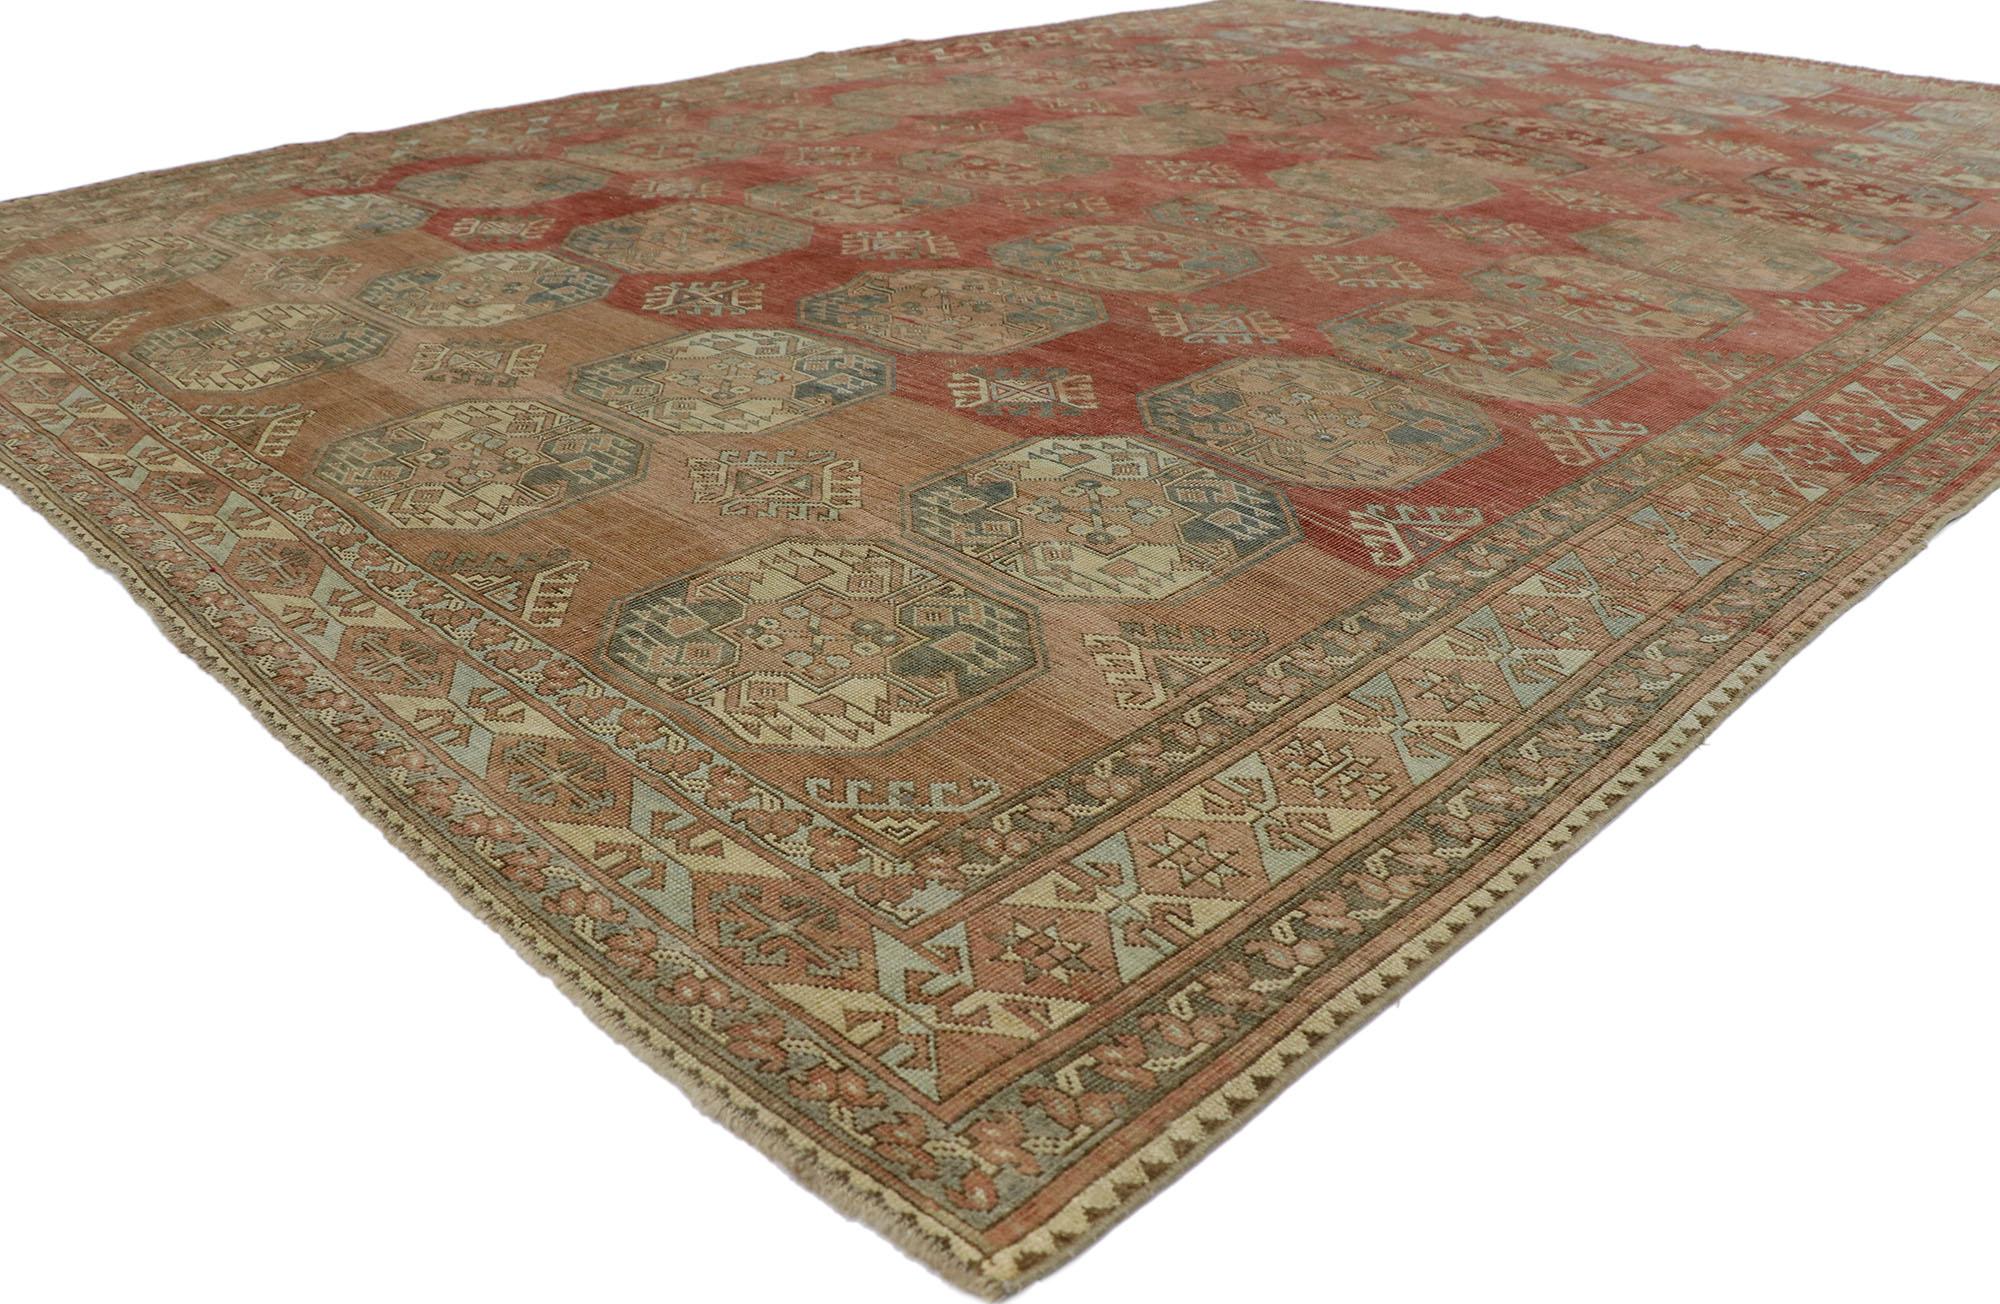 53658 Vintage Turkish Oushak Rug with Turkoman Design 08'06 x 11'07.
Abrash. Hand-knotted wool. Made in Turkey.